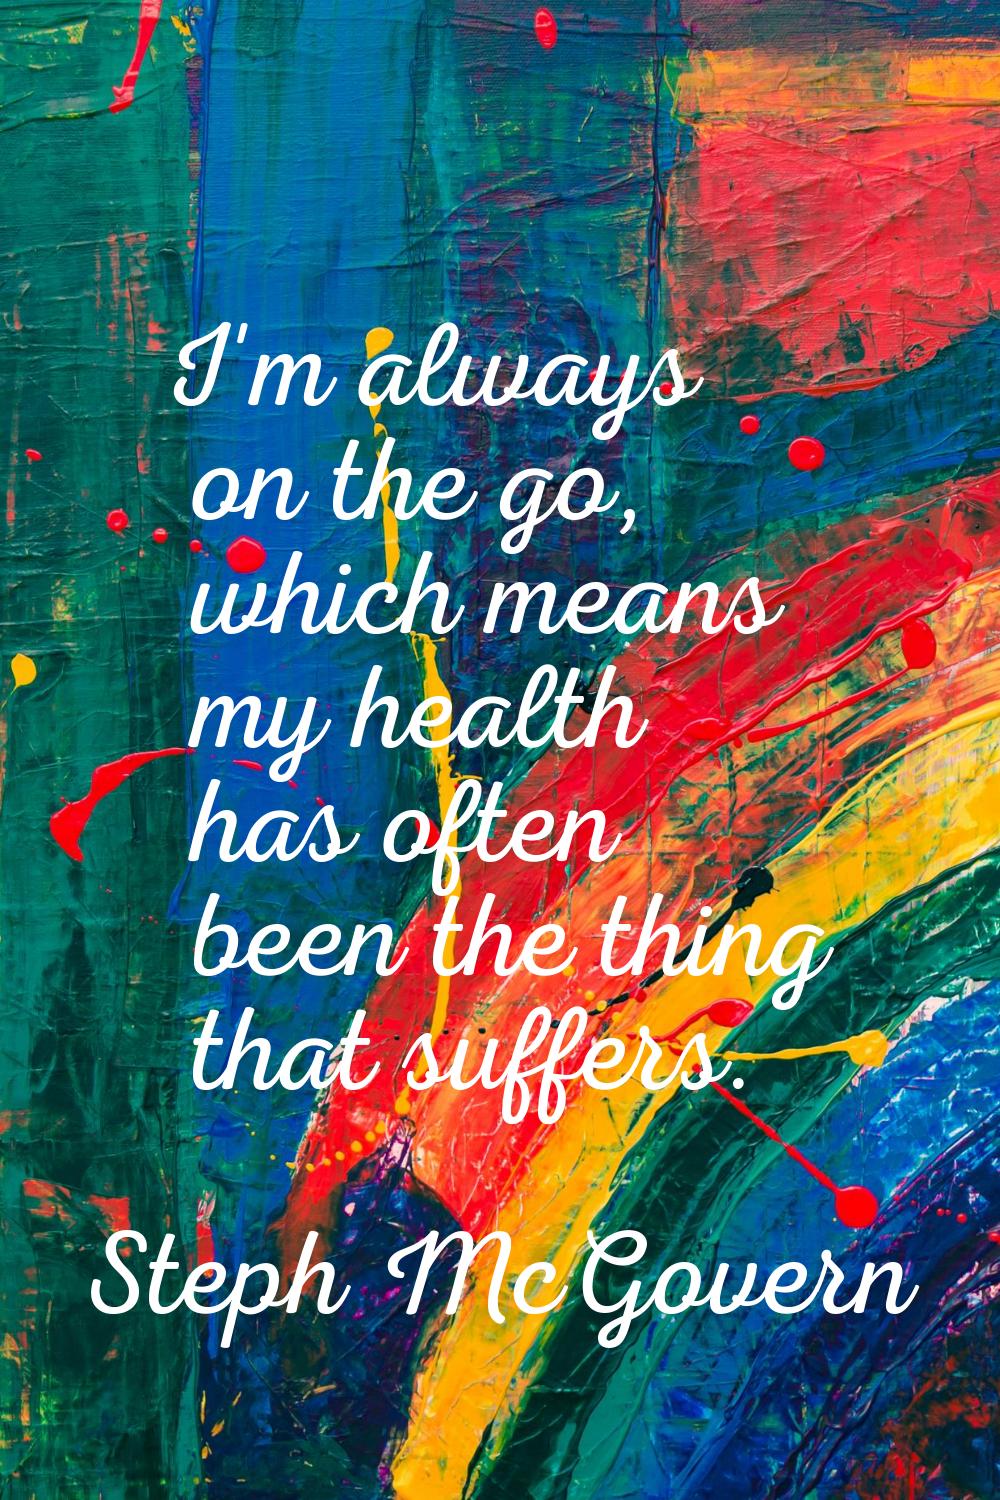 I'm always on the go, which means my health has often been the thing that suffers.